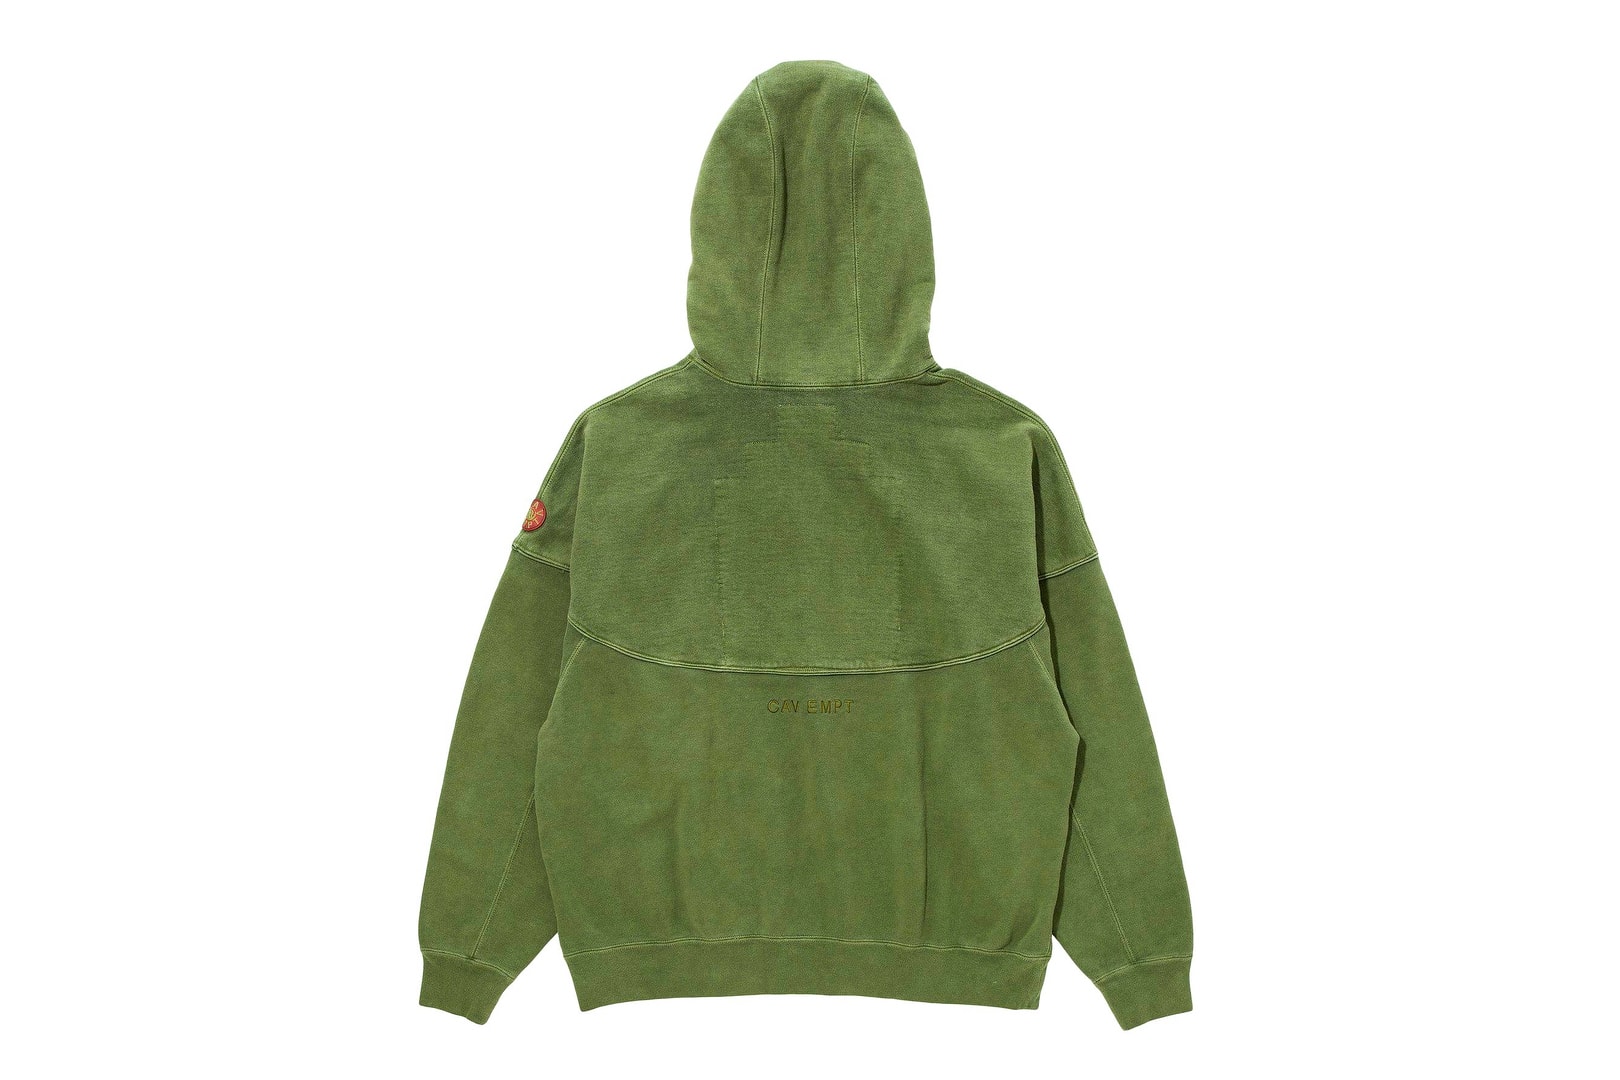 Cav Empt H BEAUTY & YOUTH united arrows Fall winter 2018 Collaboration collection exclusive september 15 2018 green hoodie wash sweater pullover sweatpants tee shirt big oversized white black graphic print sk8thng release buy purchase sale sell japan vogue fashion night out